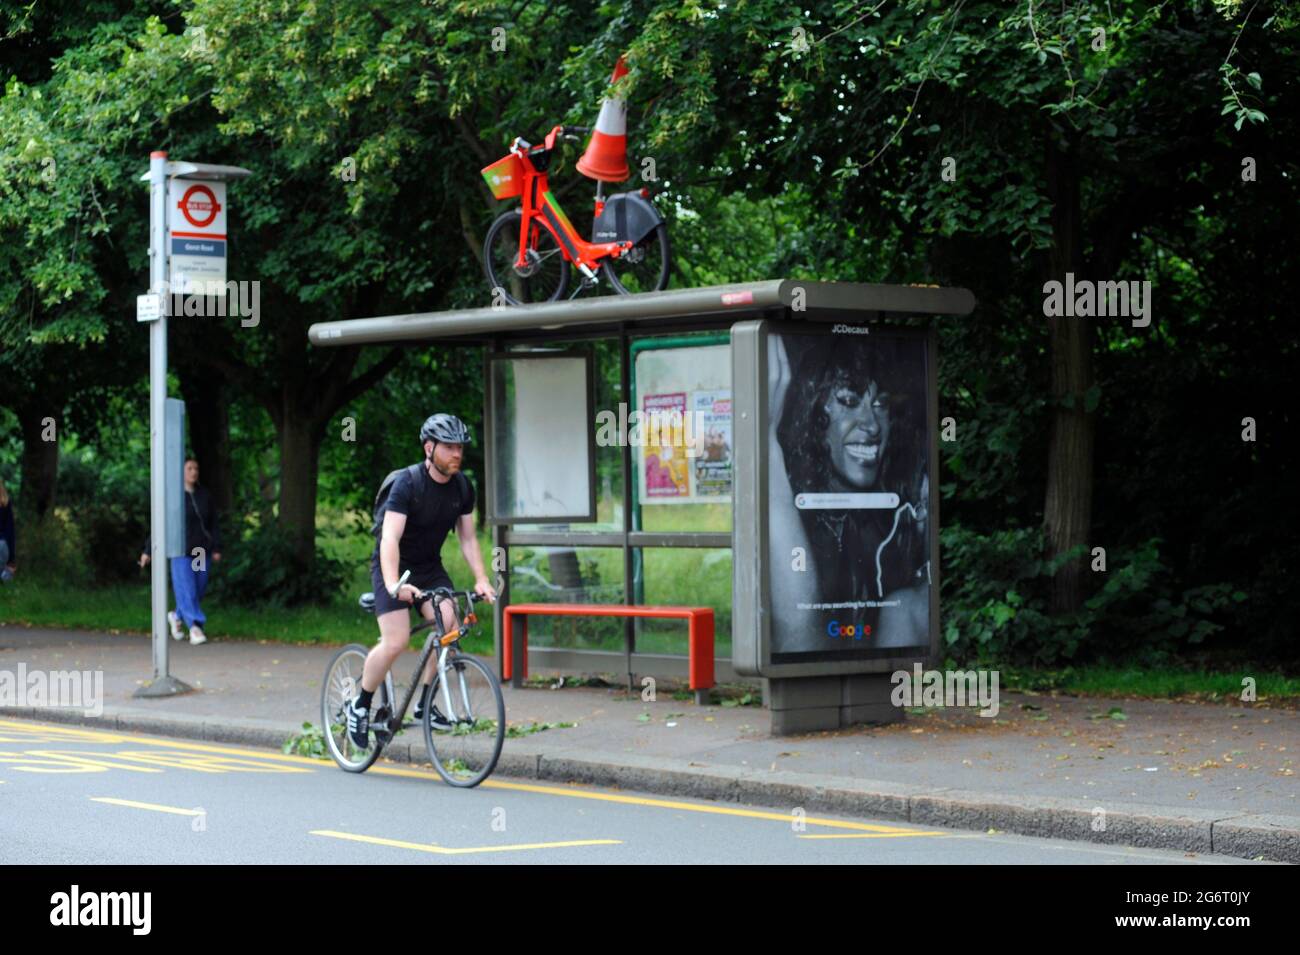 London, UK. 8th July, 2021. Lime rental Bike left on bus stand at Wandsworth Common after night of Euro football win celebrations after England beat Denmark at Wembley. Credit: JOHNNY ARMSTEAD/Alamy Live News Stock Photo